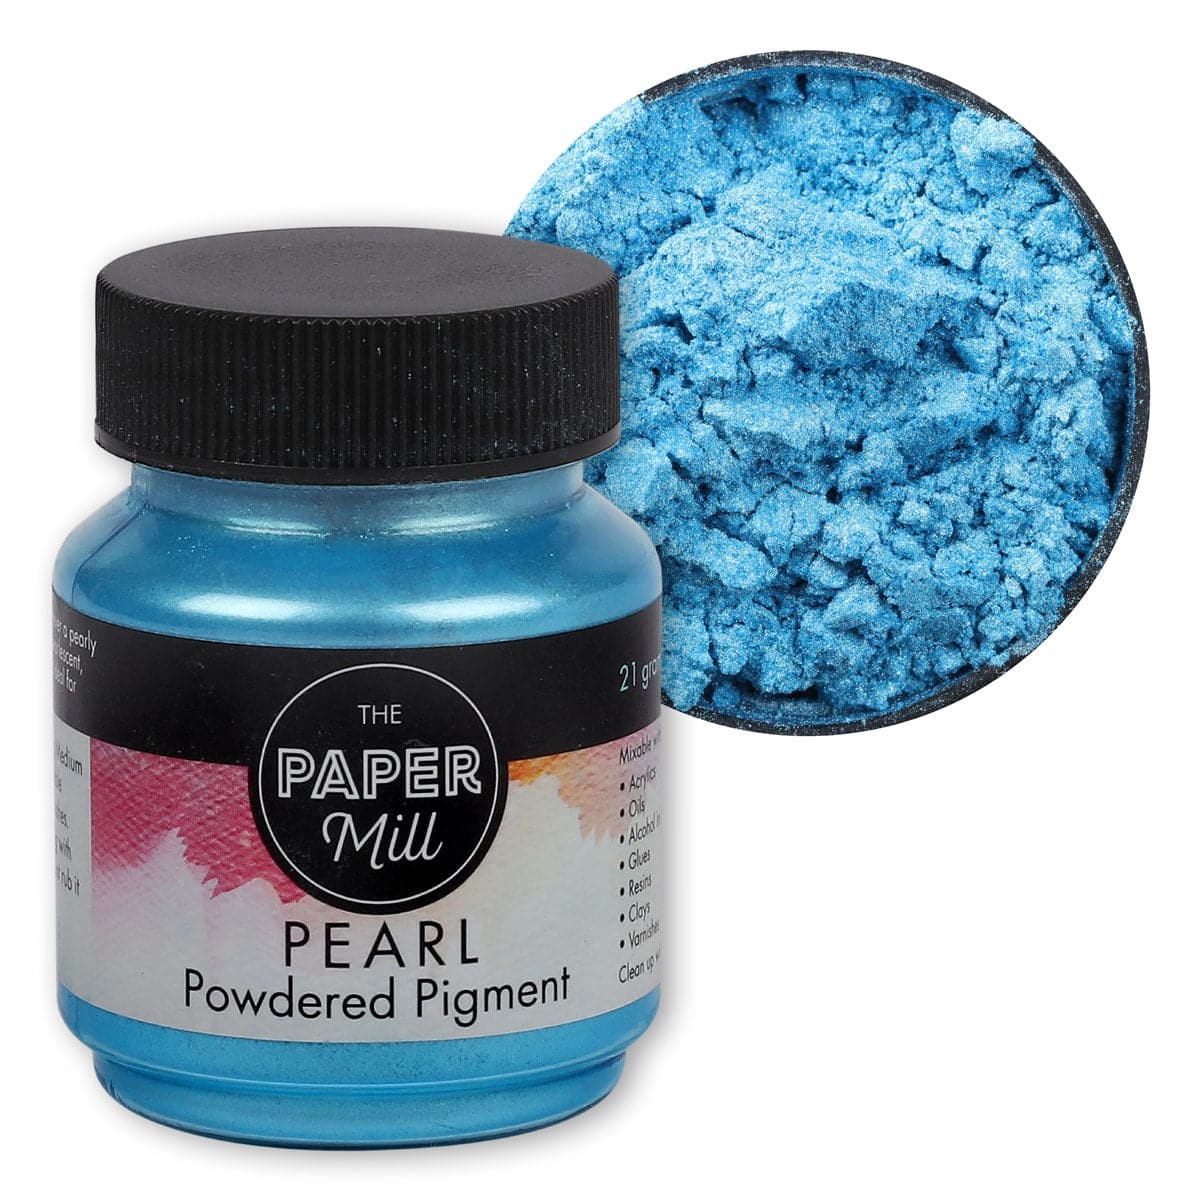 Image of The Paper Mill Pearl Powdered Pigment Sky Blue 21g